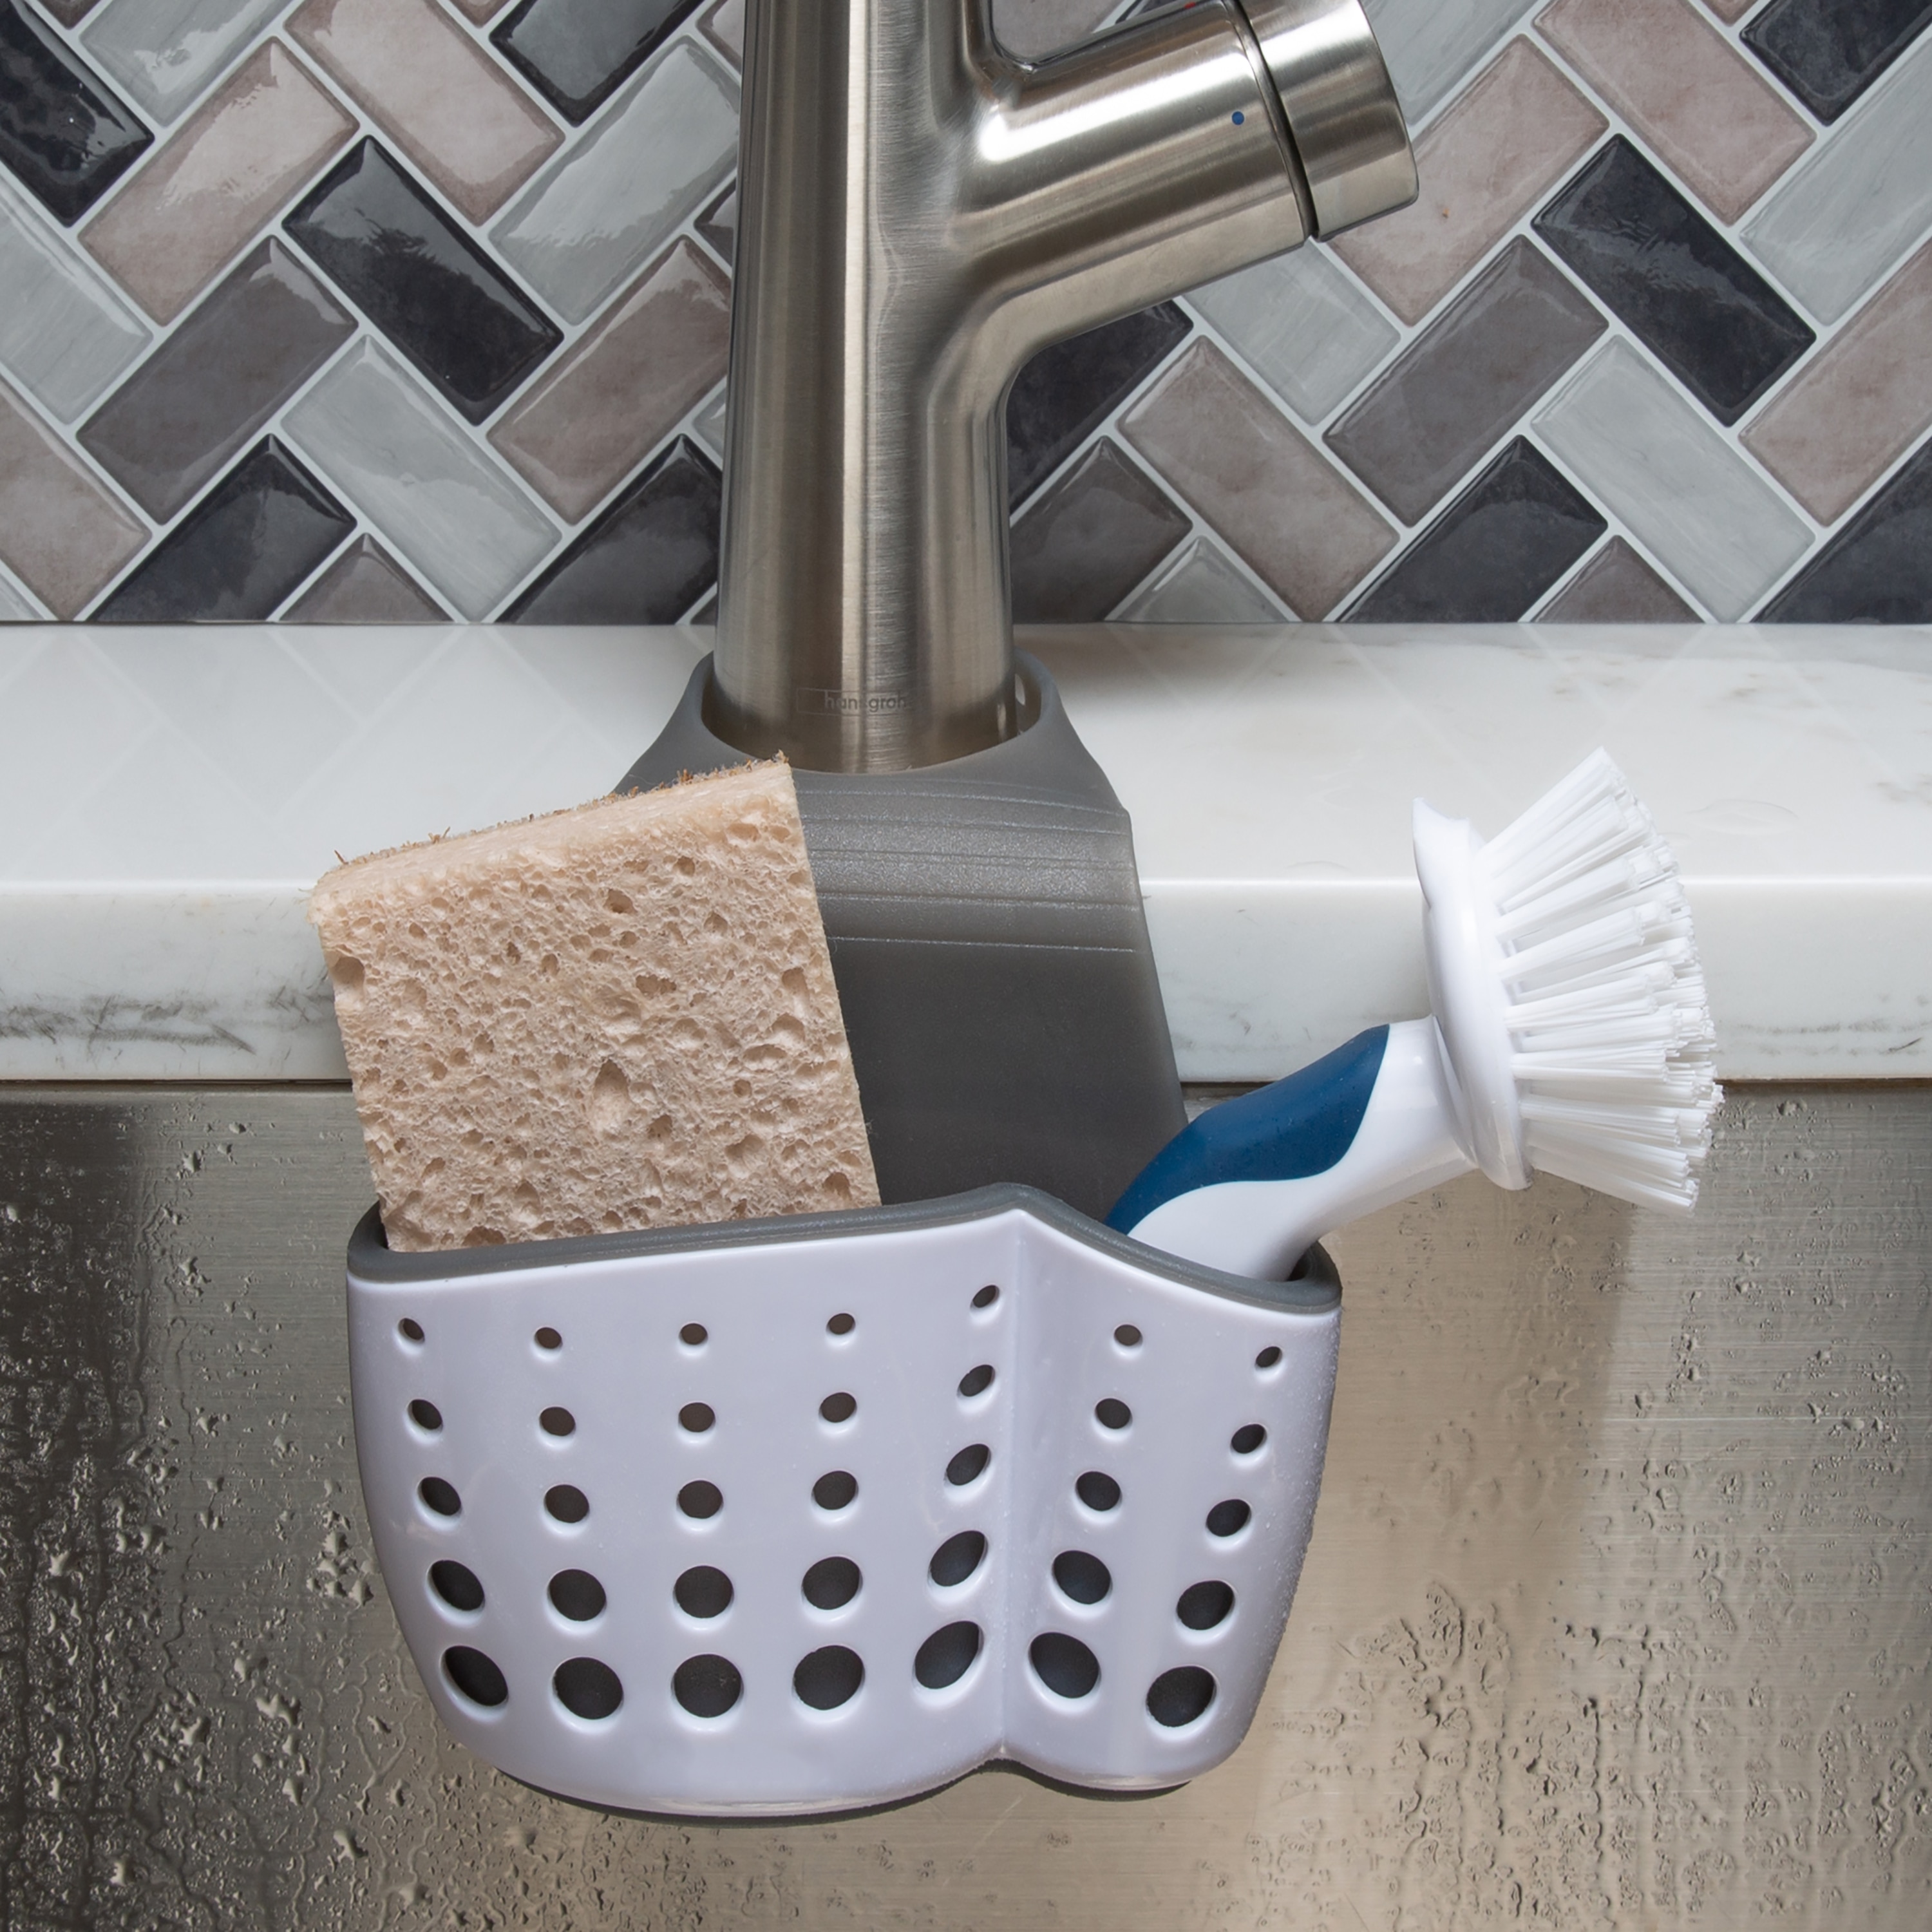 Kitchen Details 2-in-1 Sink Caddy - Hanging Plastic Sponge and